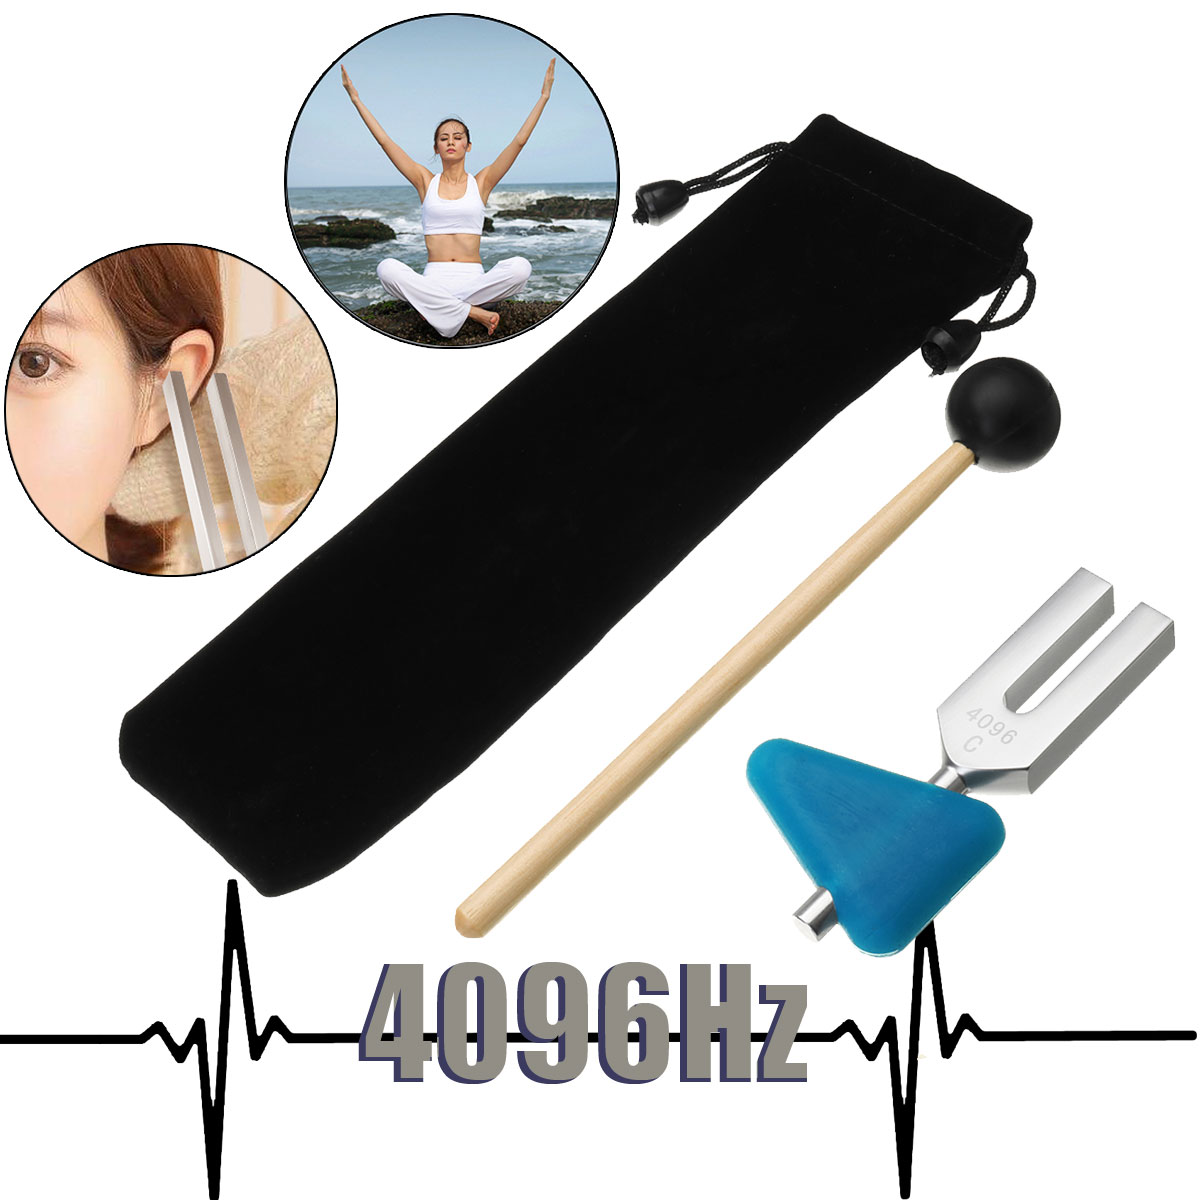 4096Hz-Aluminum-Medical-Tuning-Fork-Chakra-Triangle-Percussion-Turning-Hammer-with-Mallet-1349719-1